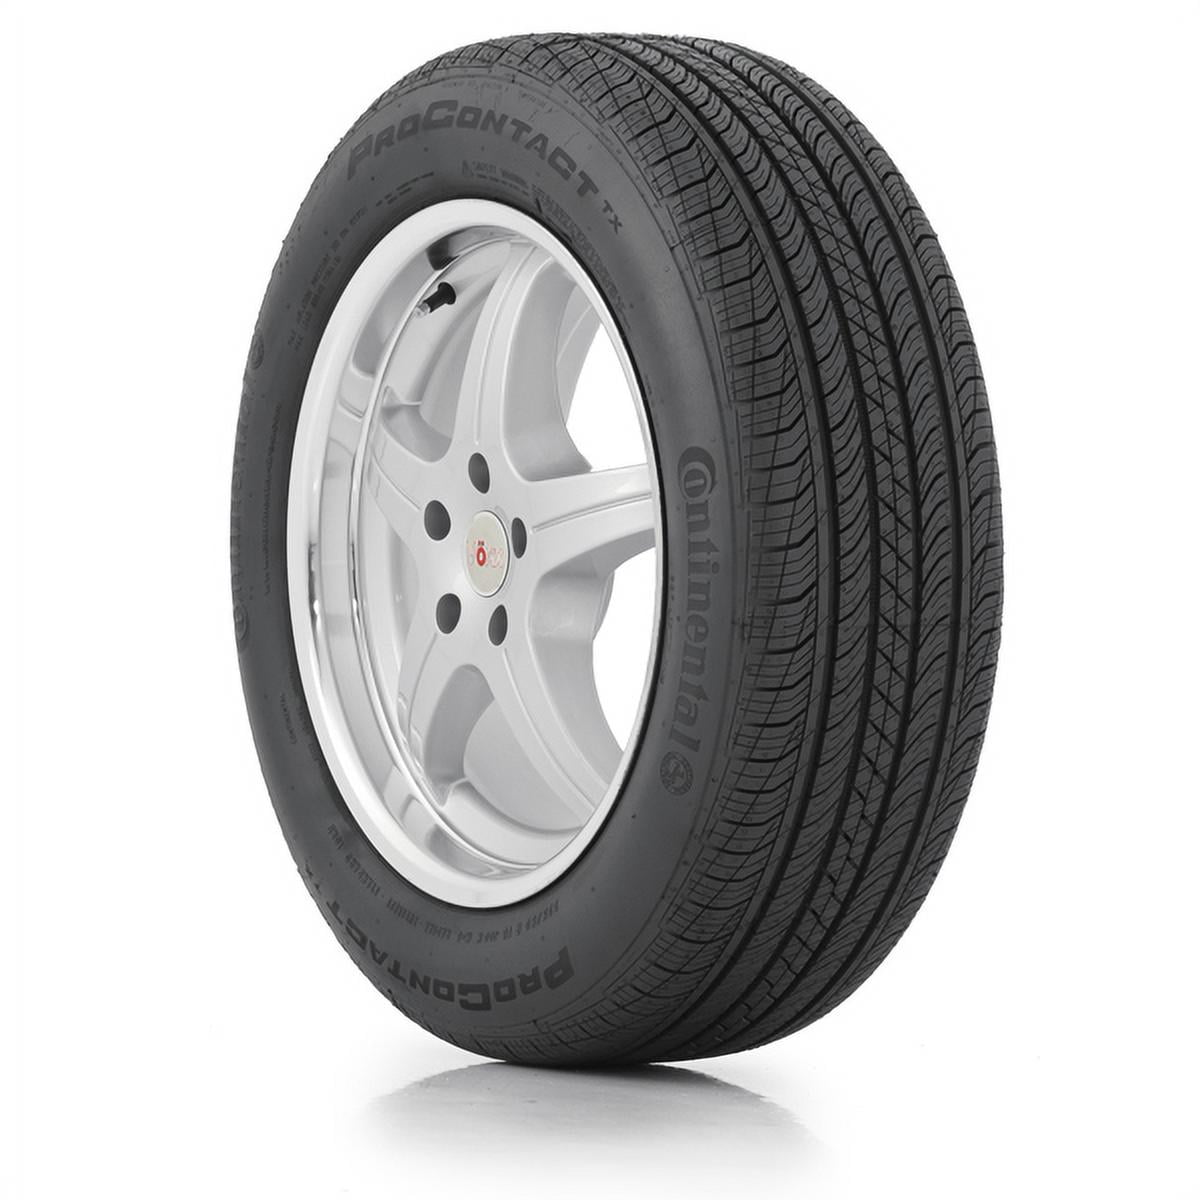 215/60R17 96H Continental Pro Contact TX Performance Radial Tire